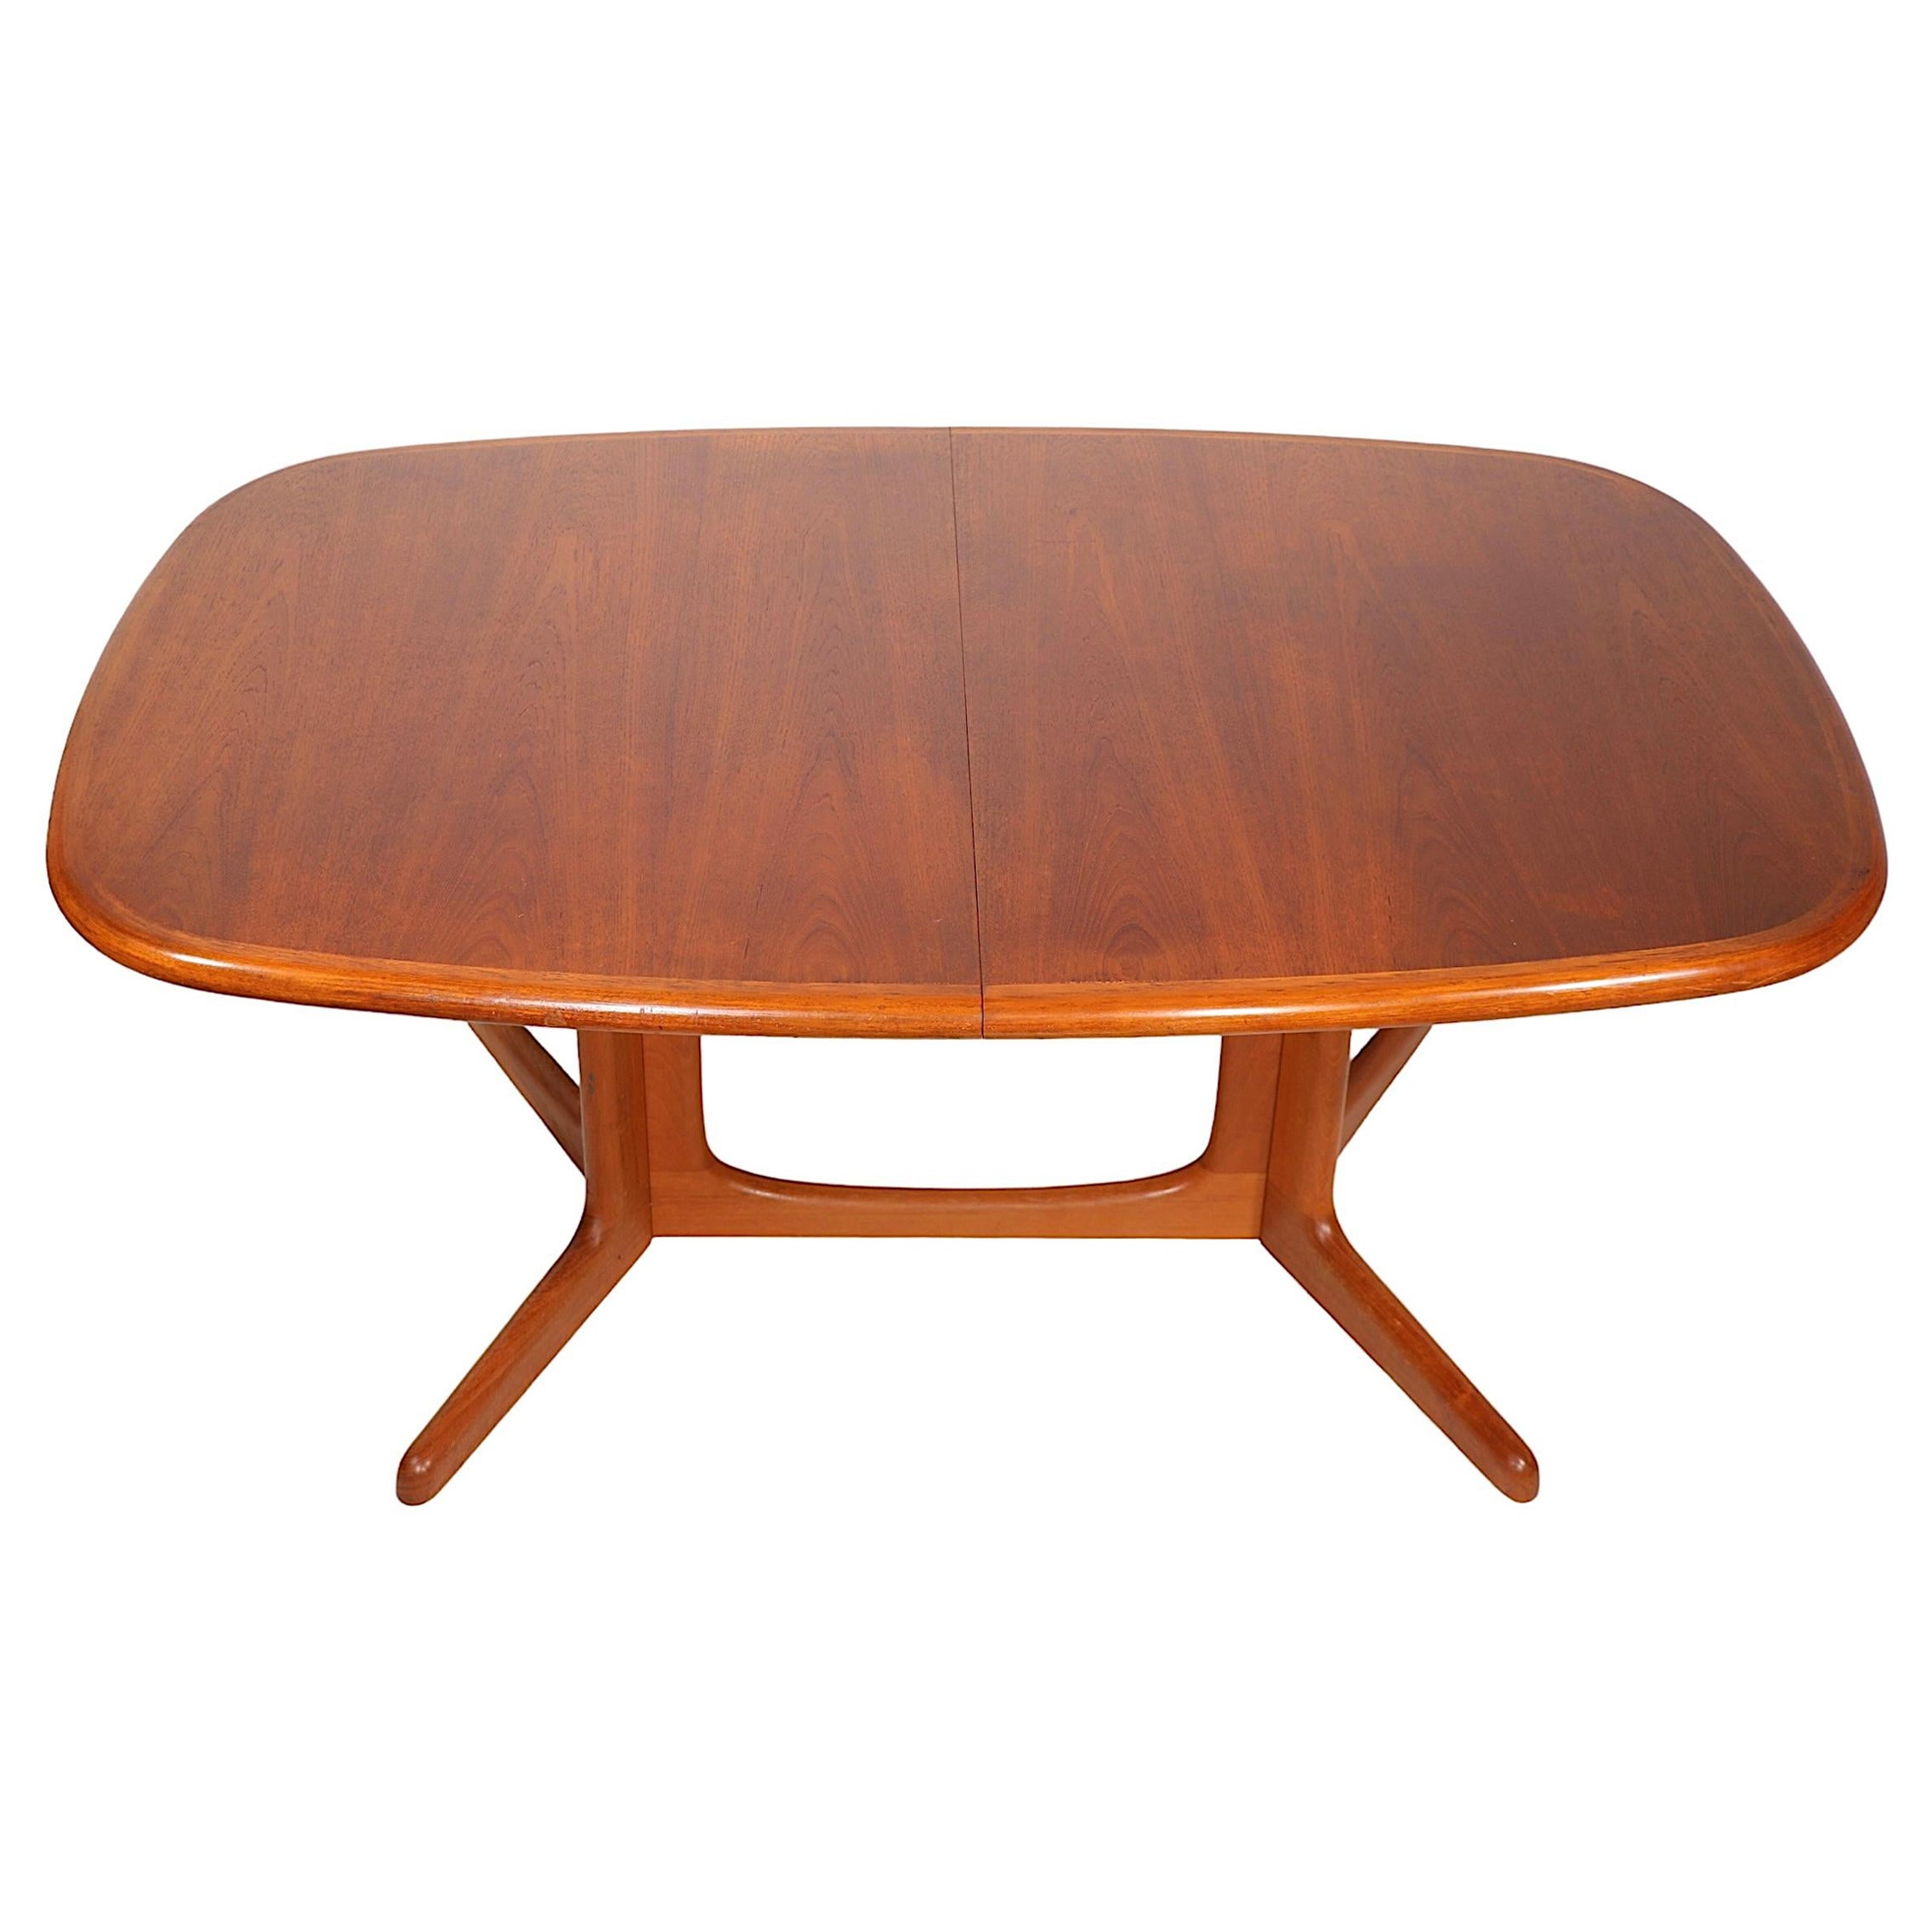 Danish Mid Century Oval Teak Dining Table by Niels Otto Moller for Gudme c 1970s